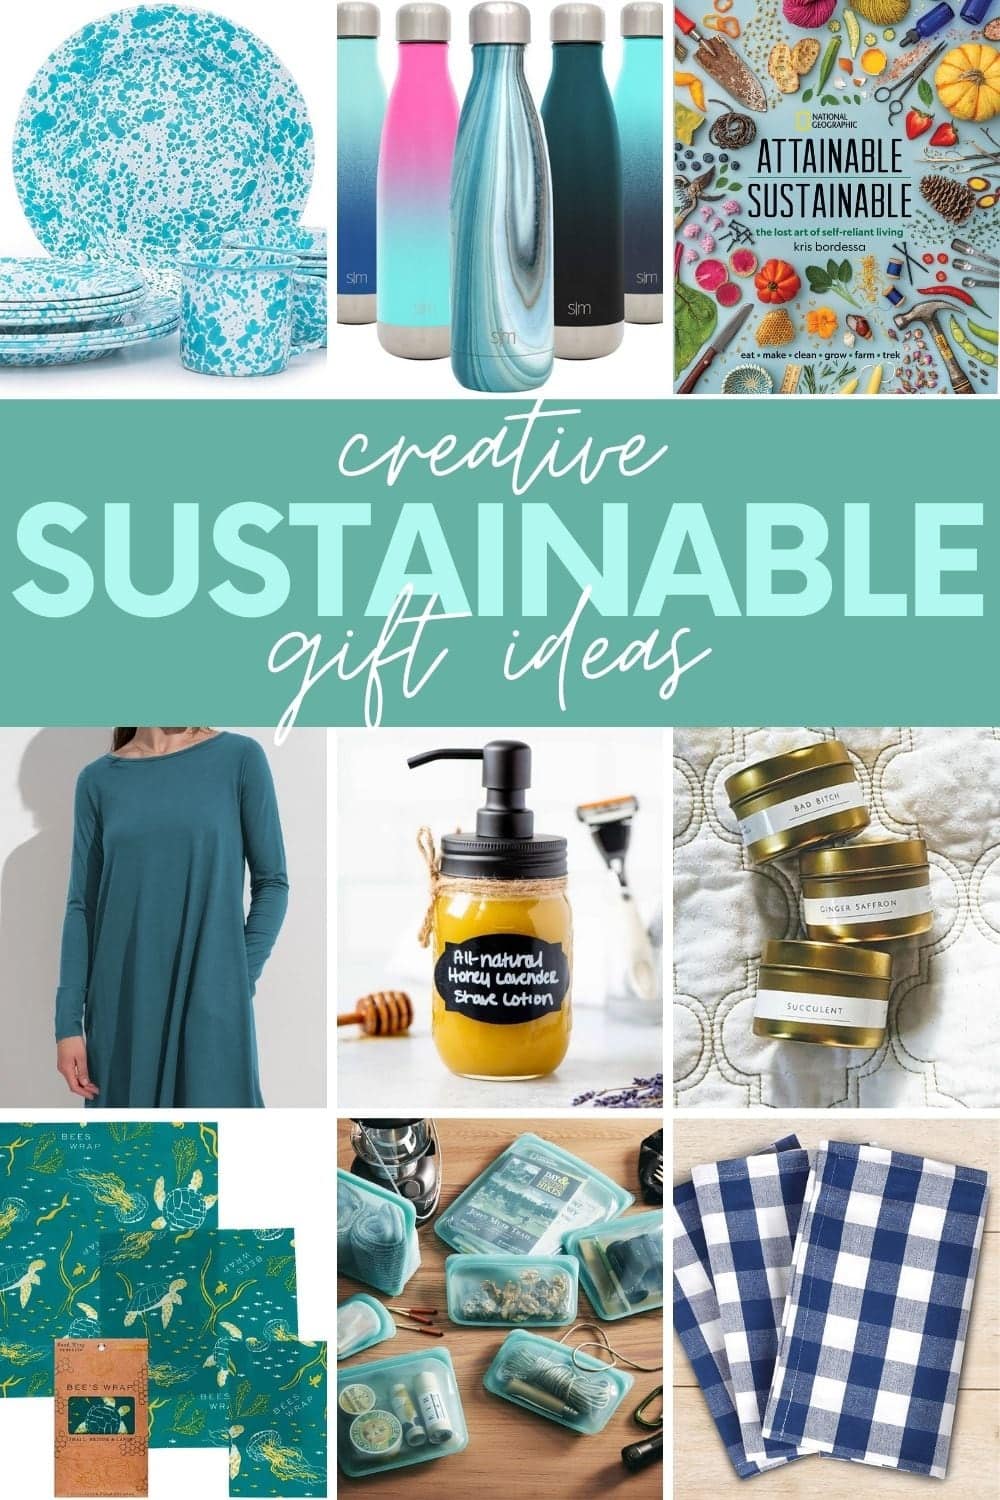 Creative Sustainable Gifts Ideas for 2022